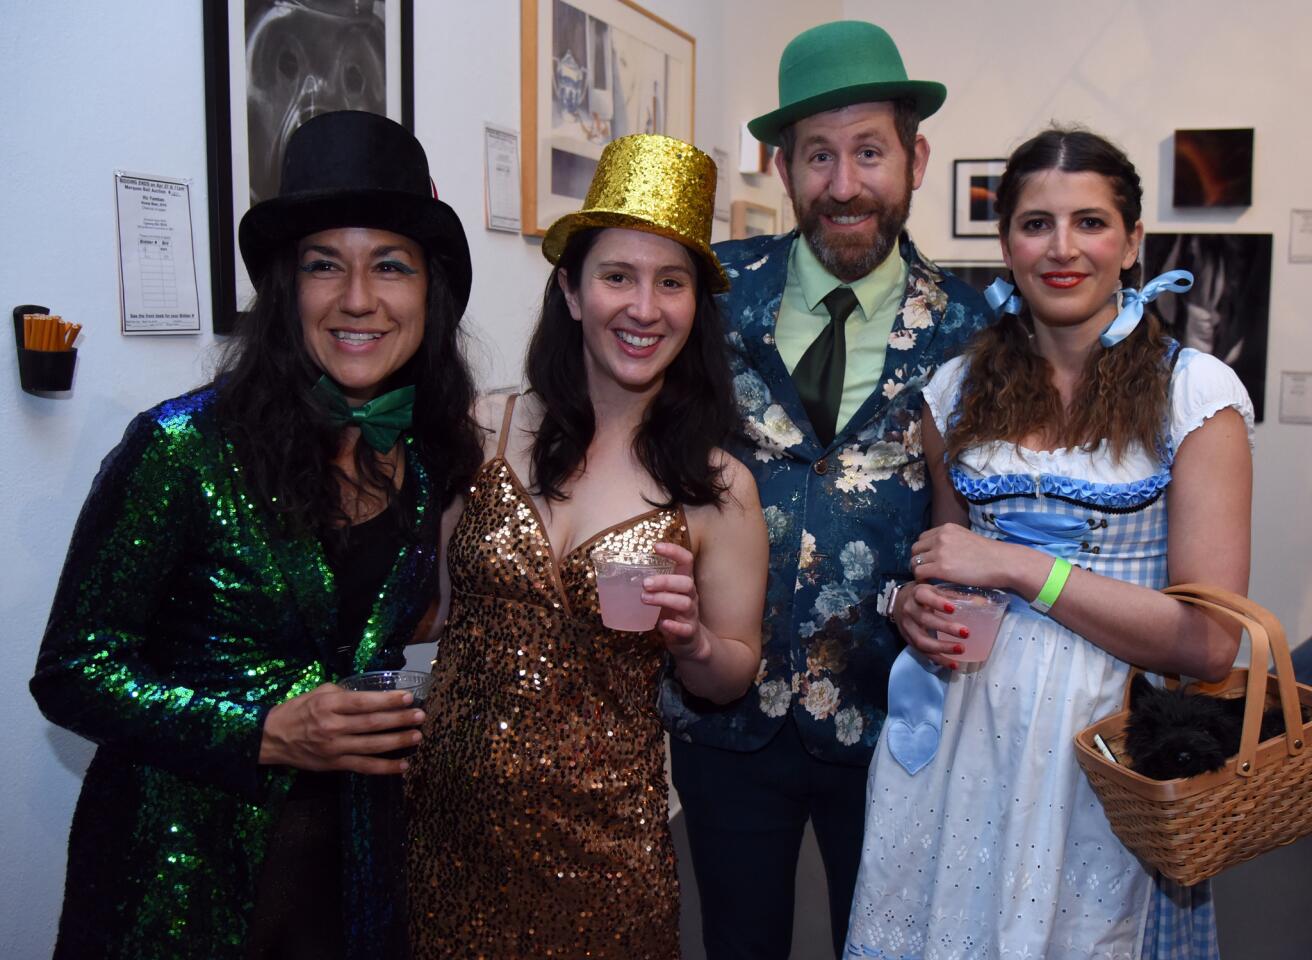 Katie Long, Annie Worth, Phillip Stafford, Nora Luetzgendorf at the Marquee Ball at the Creative Alliance.